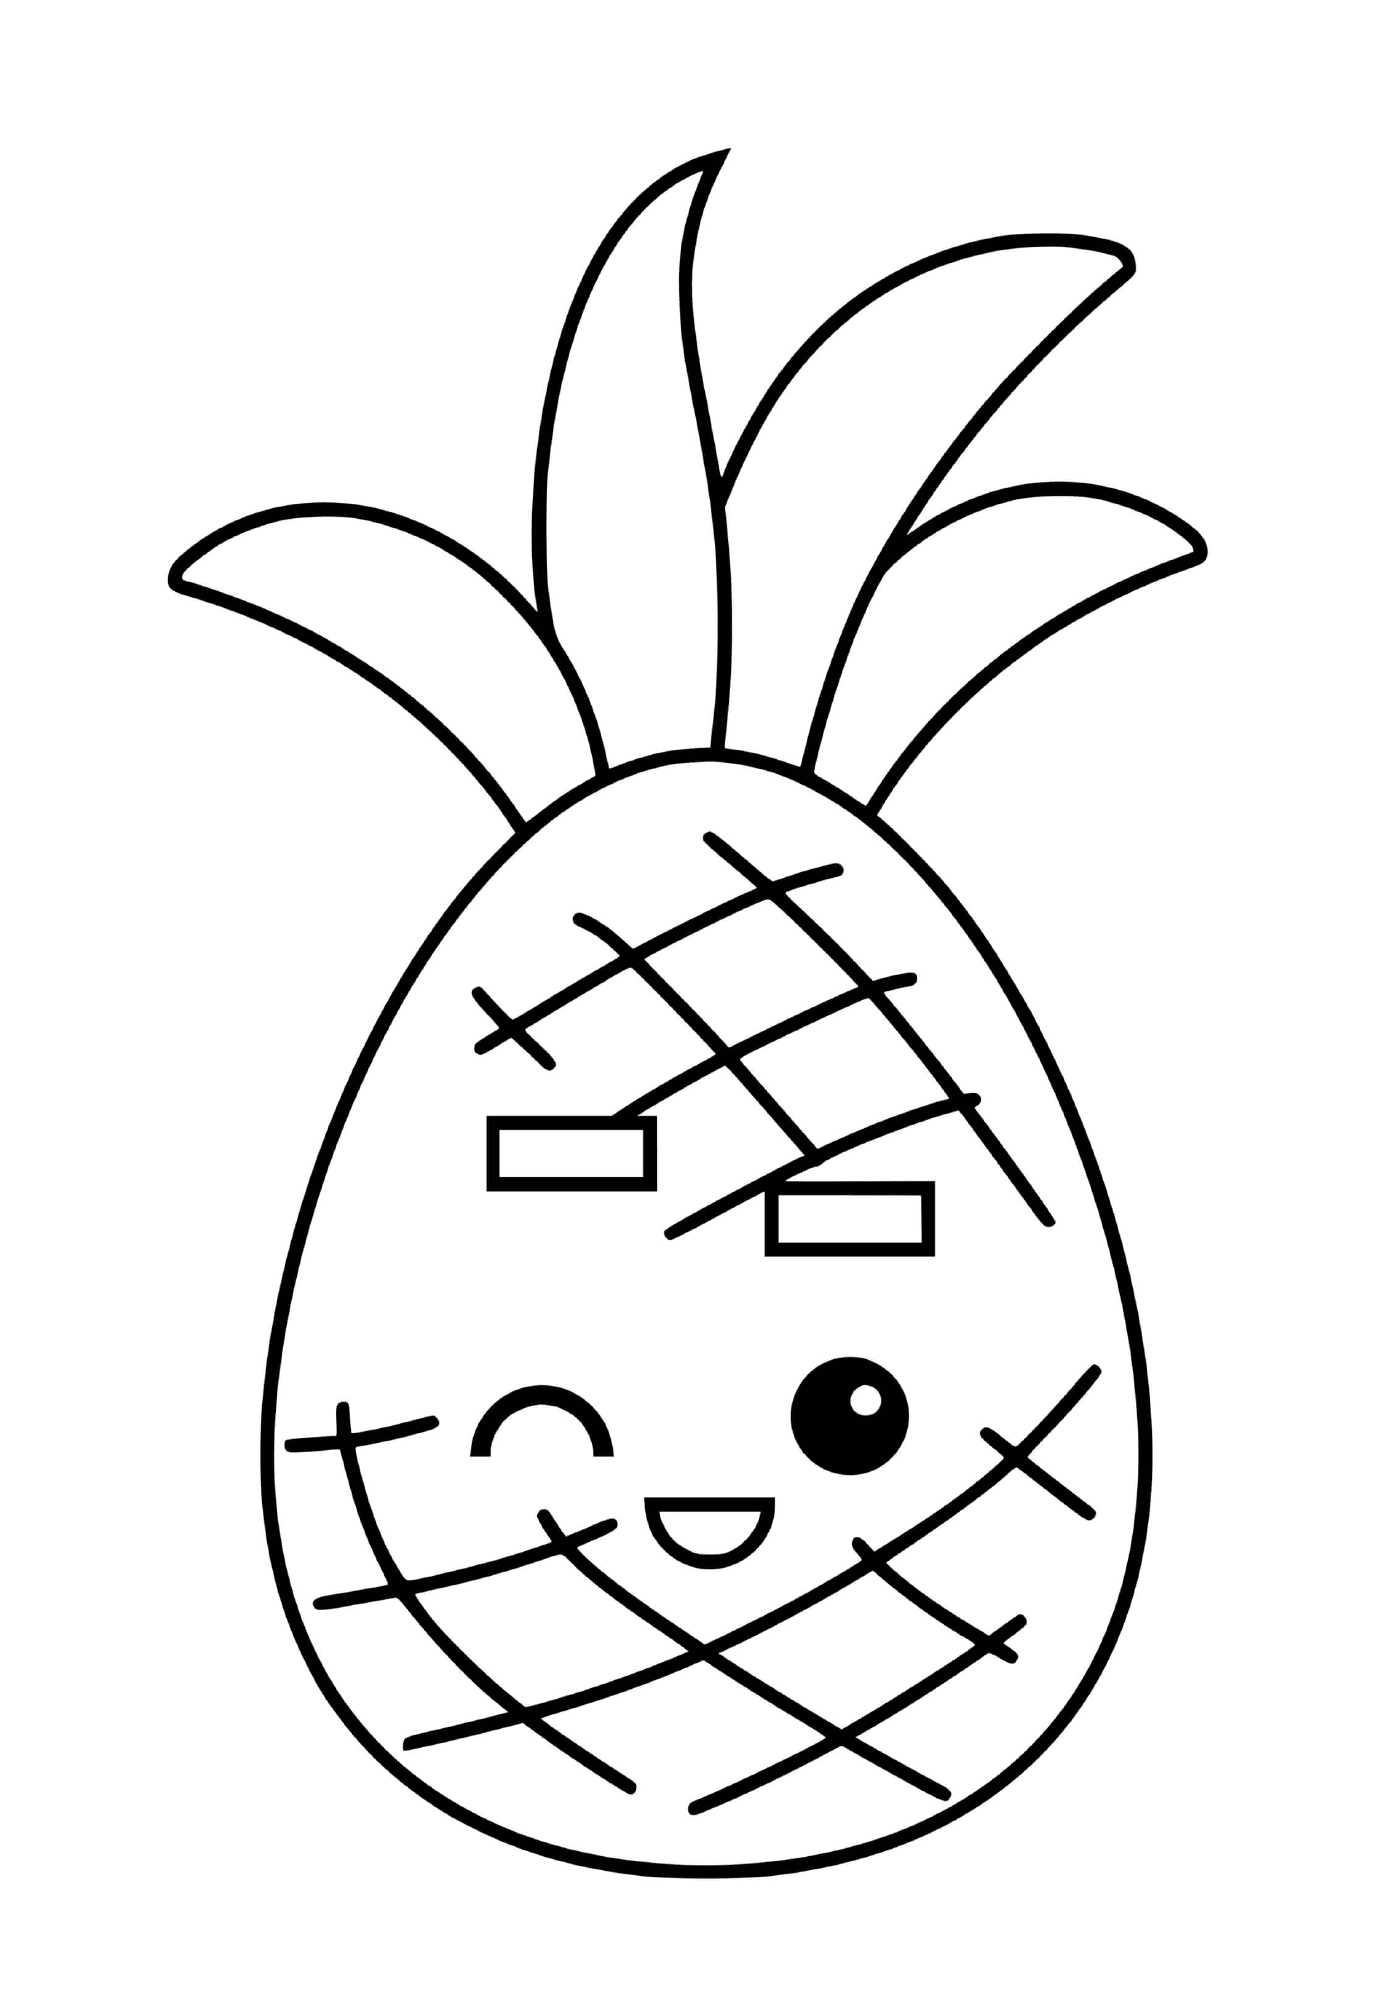  A pineapple with a cute face 